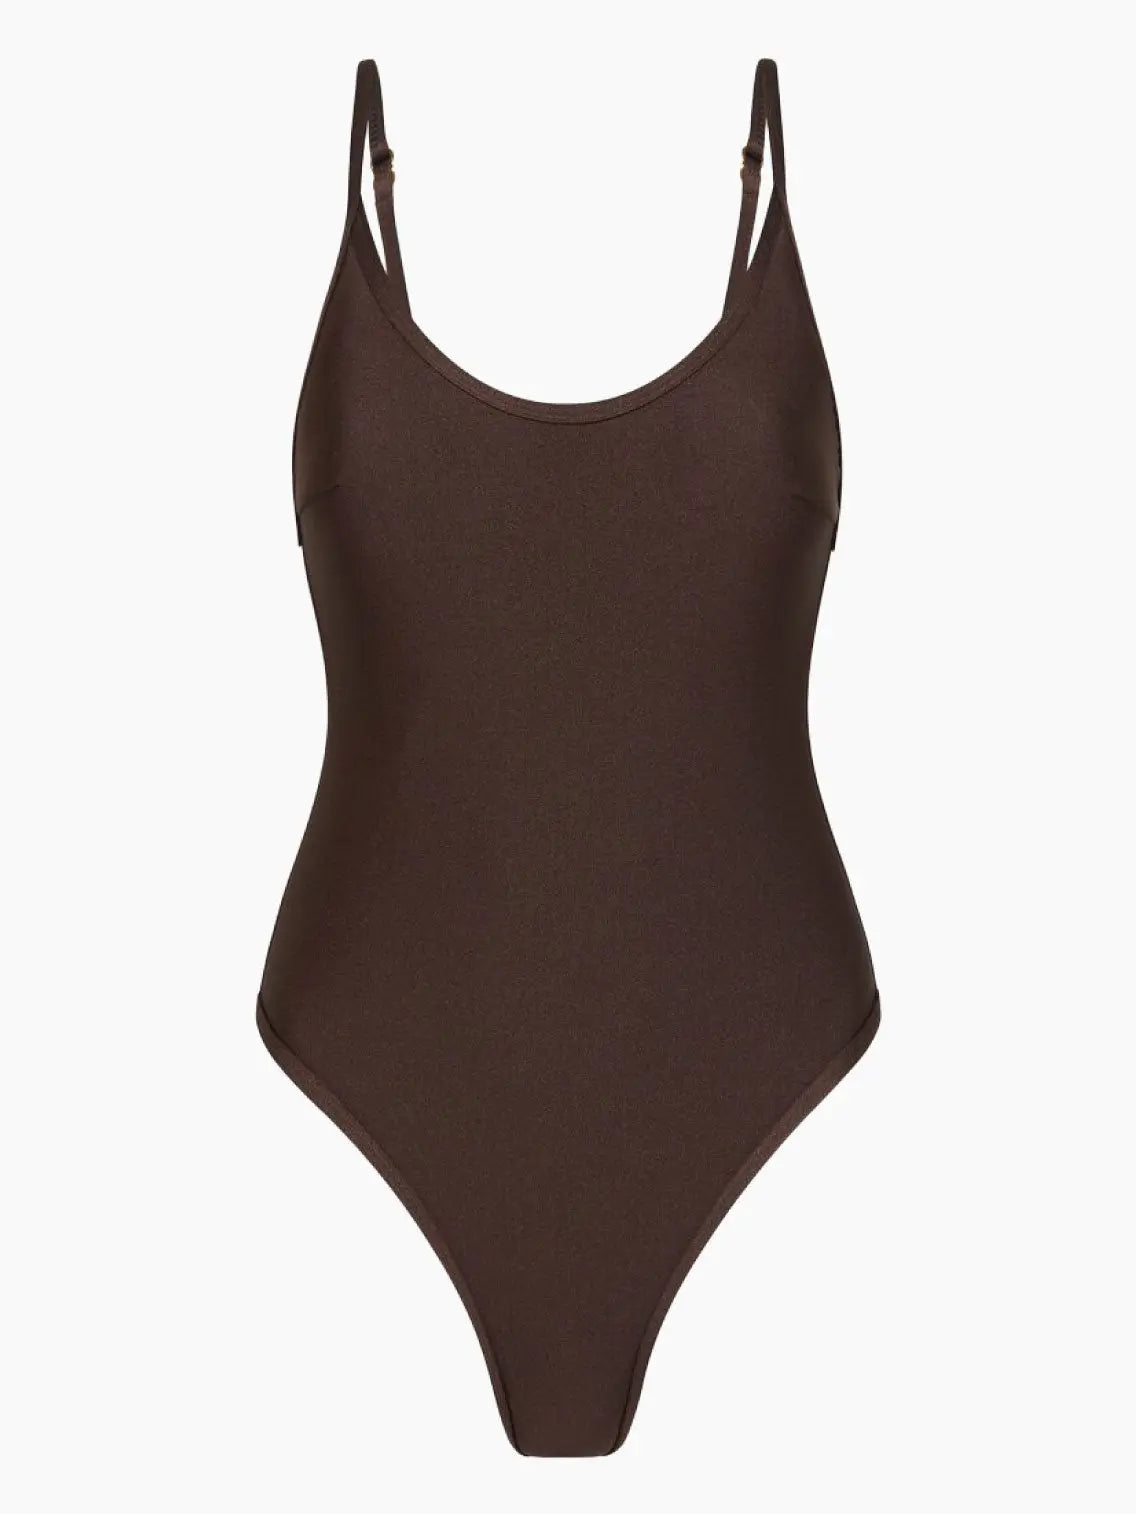 A brown, one-piece swimsuit with thin, adjustable straps and a high-cut leg available at BassalStore in Barcelona. The Chocolate Scoop One Piece Swimwear by Innes Lauren features a smooth, seamless design and rounded neckline.